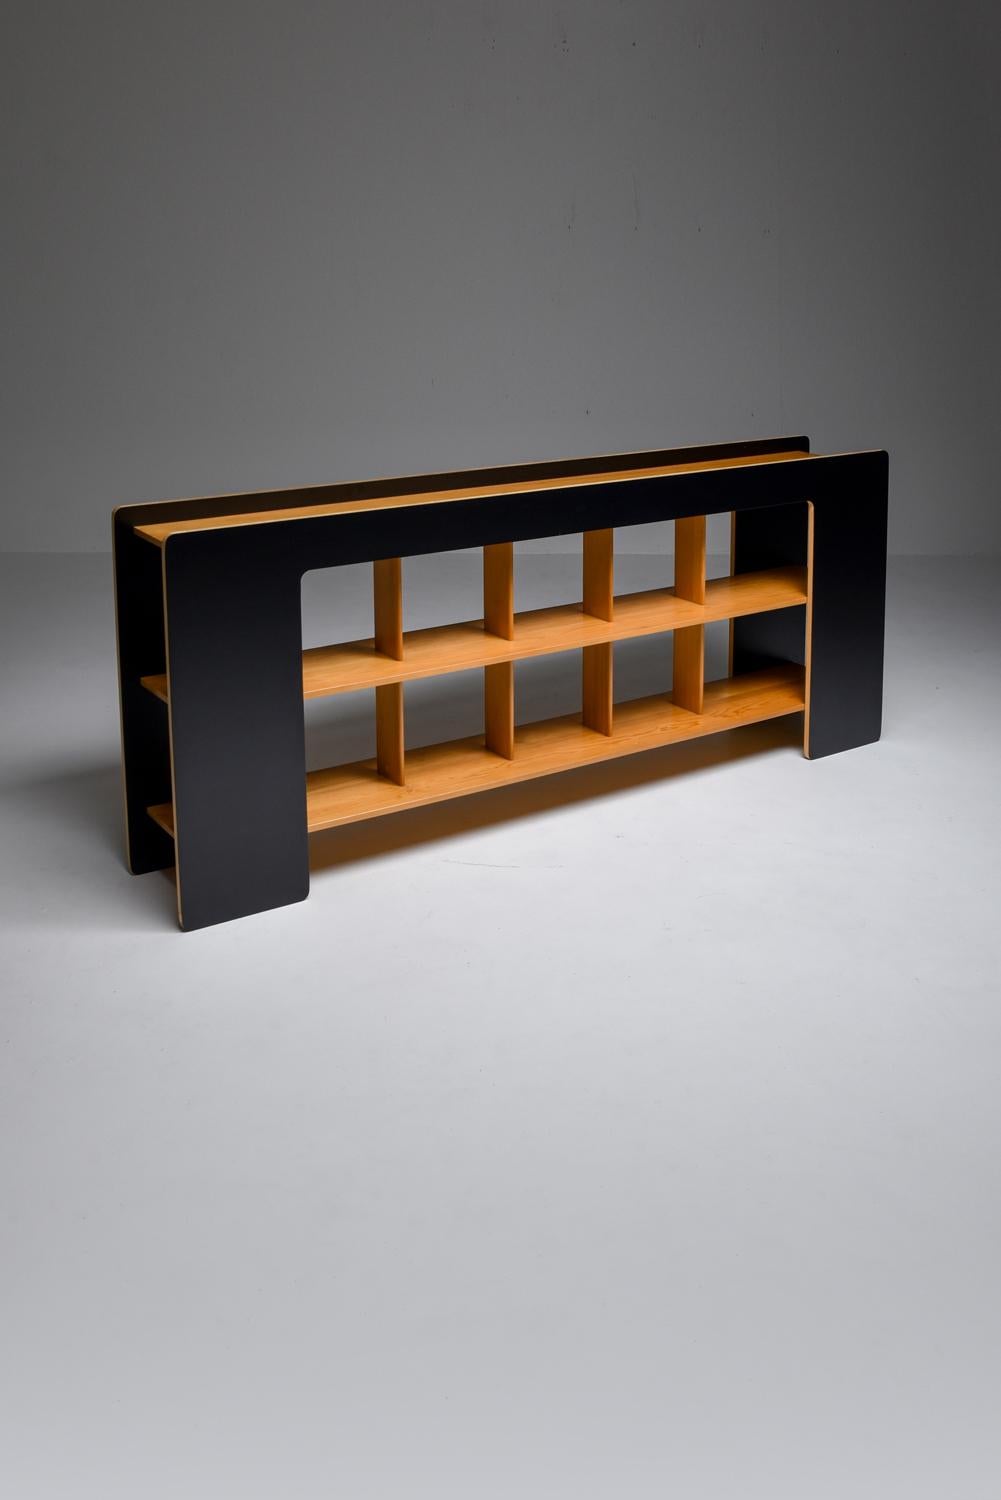 Late 20th Century Post-Modern Sideboard with Shelves by Pamio and Toso